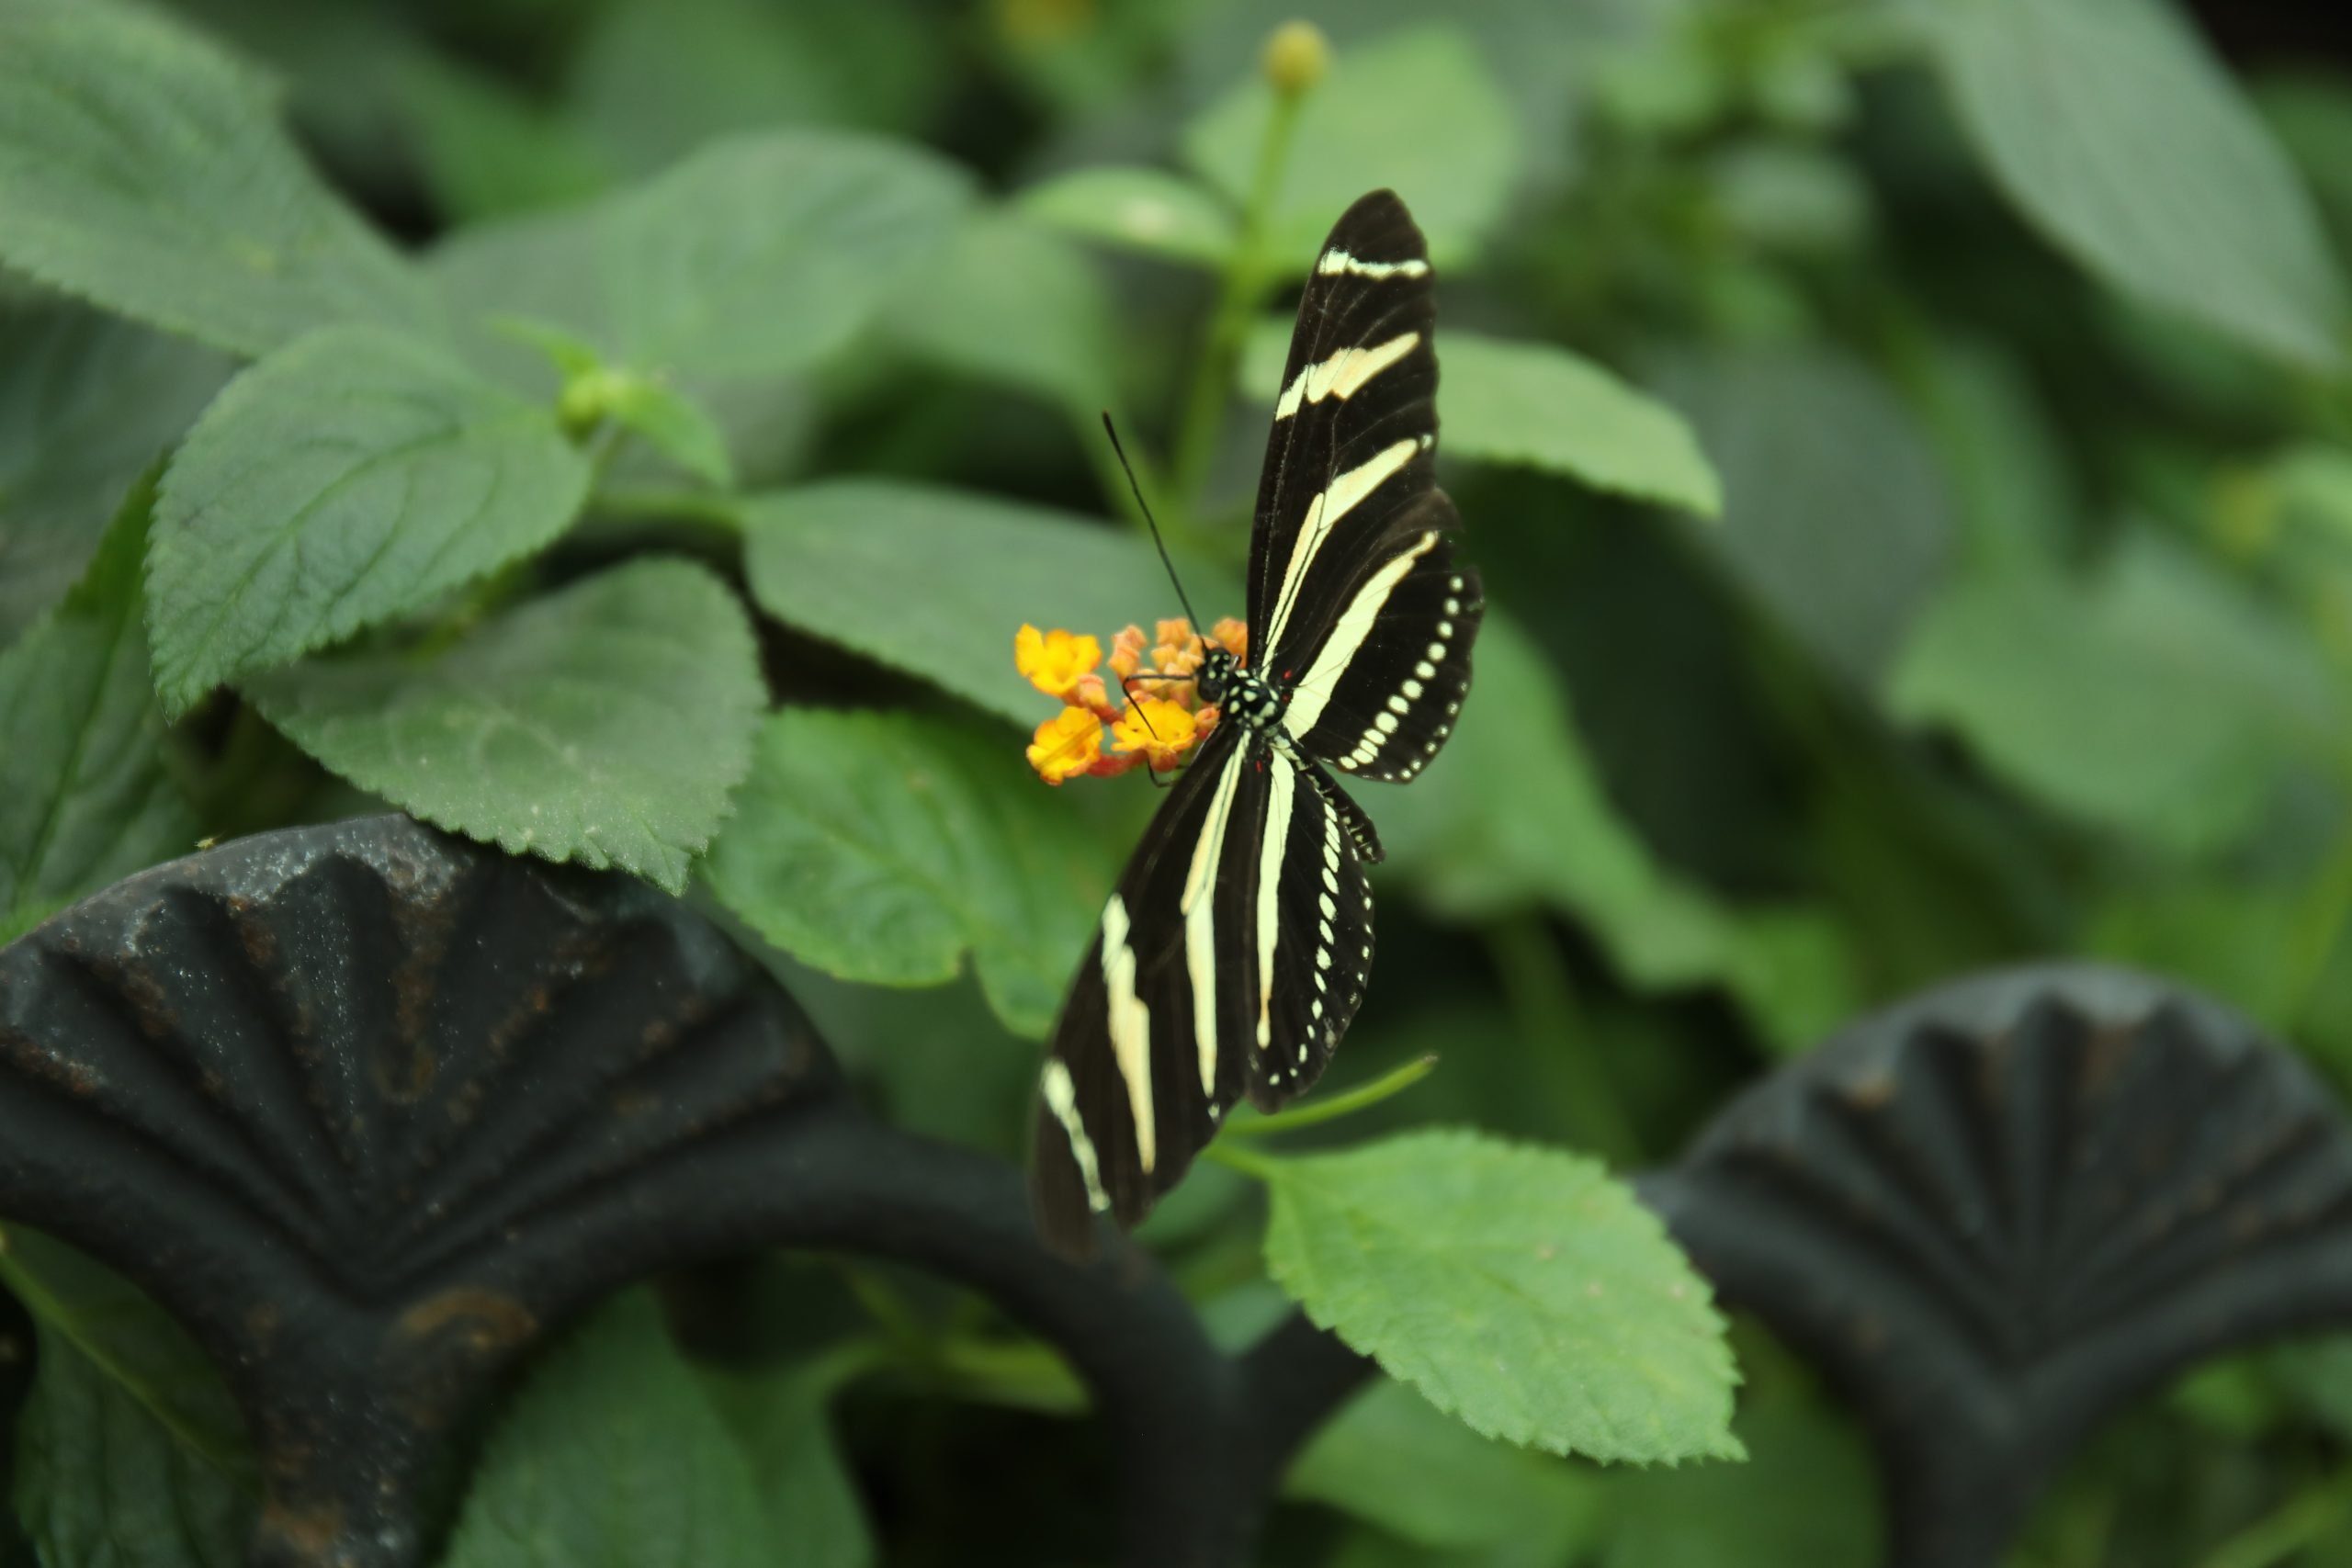 Mackinac Island is home to two butterfly conservatories including Wings of Mackinac and The Original Butterfly House.